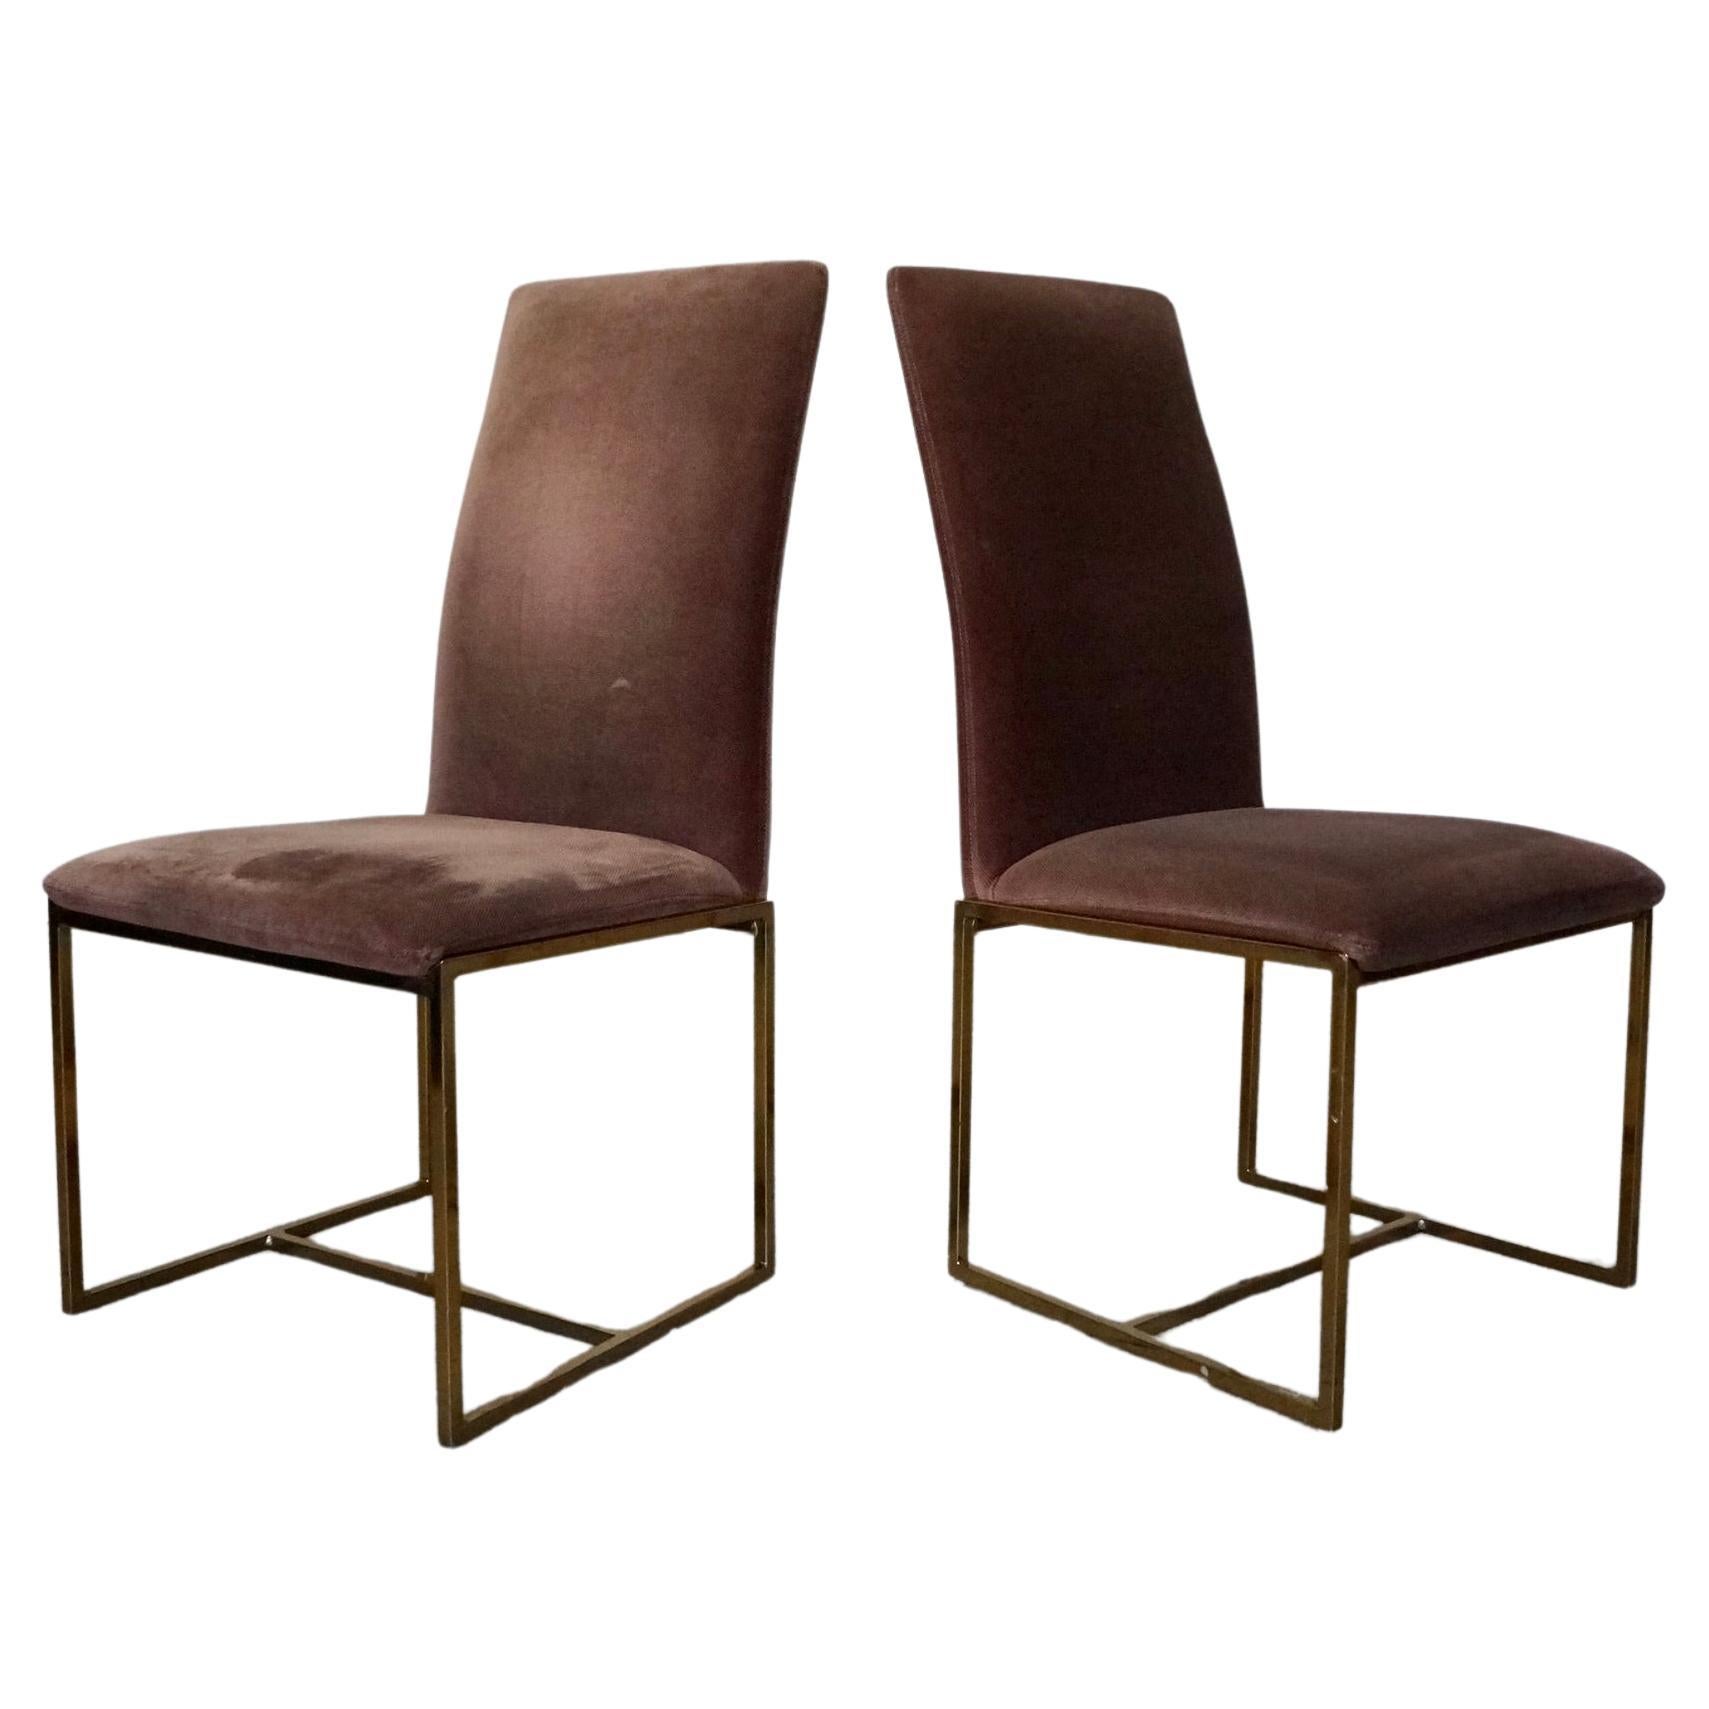 1970's Mid-Century Modern Milo Baughman Style Brass Dining Chairs - a Pair For Sale